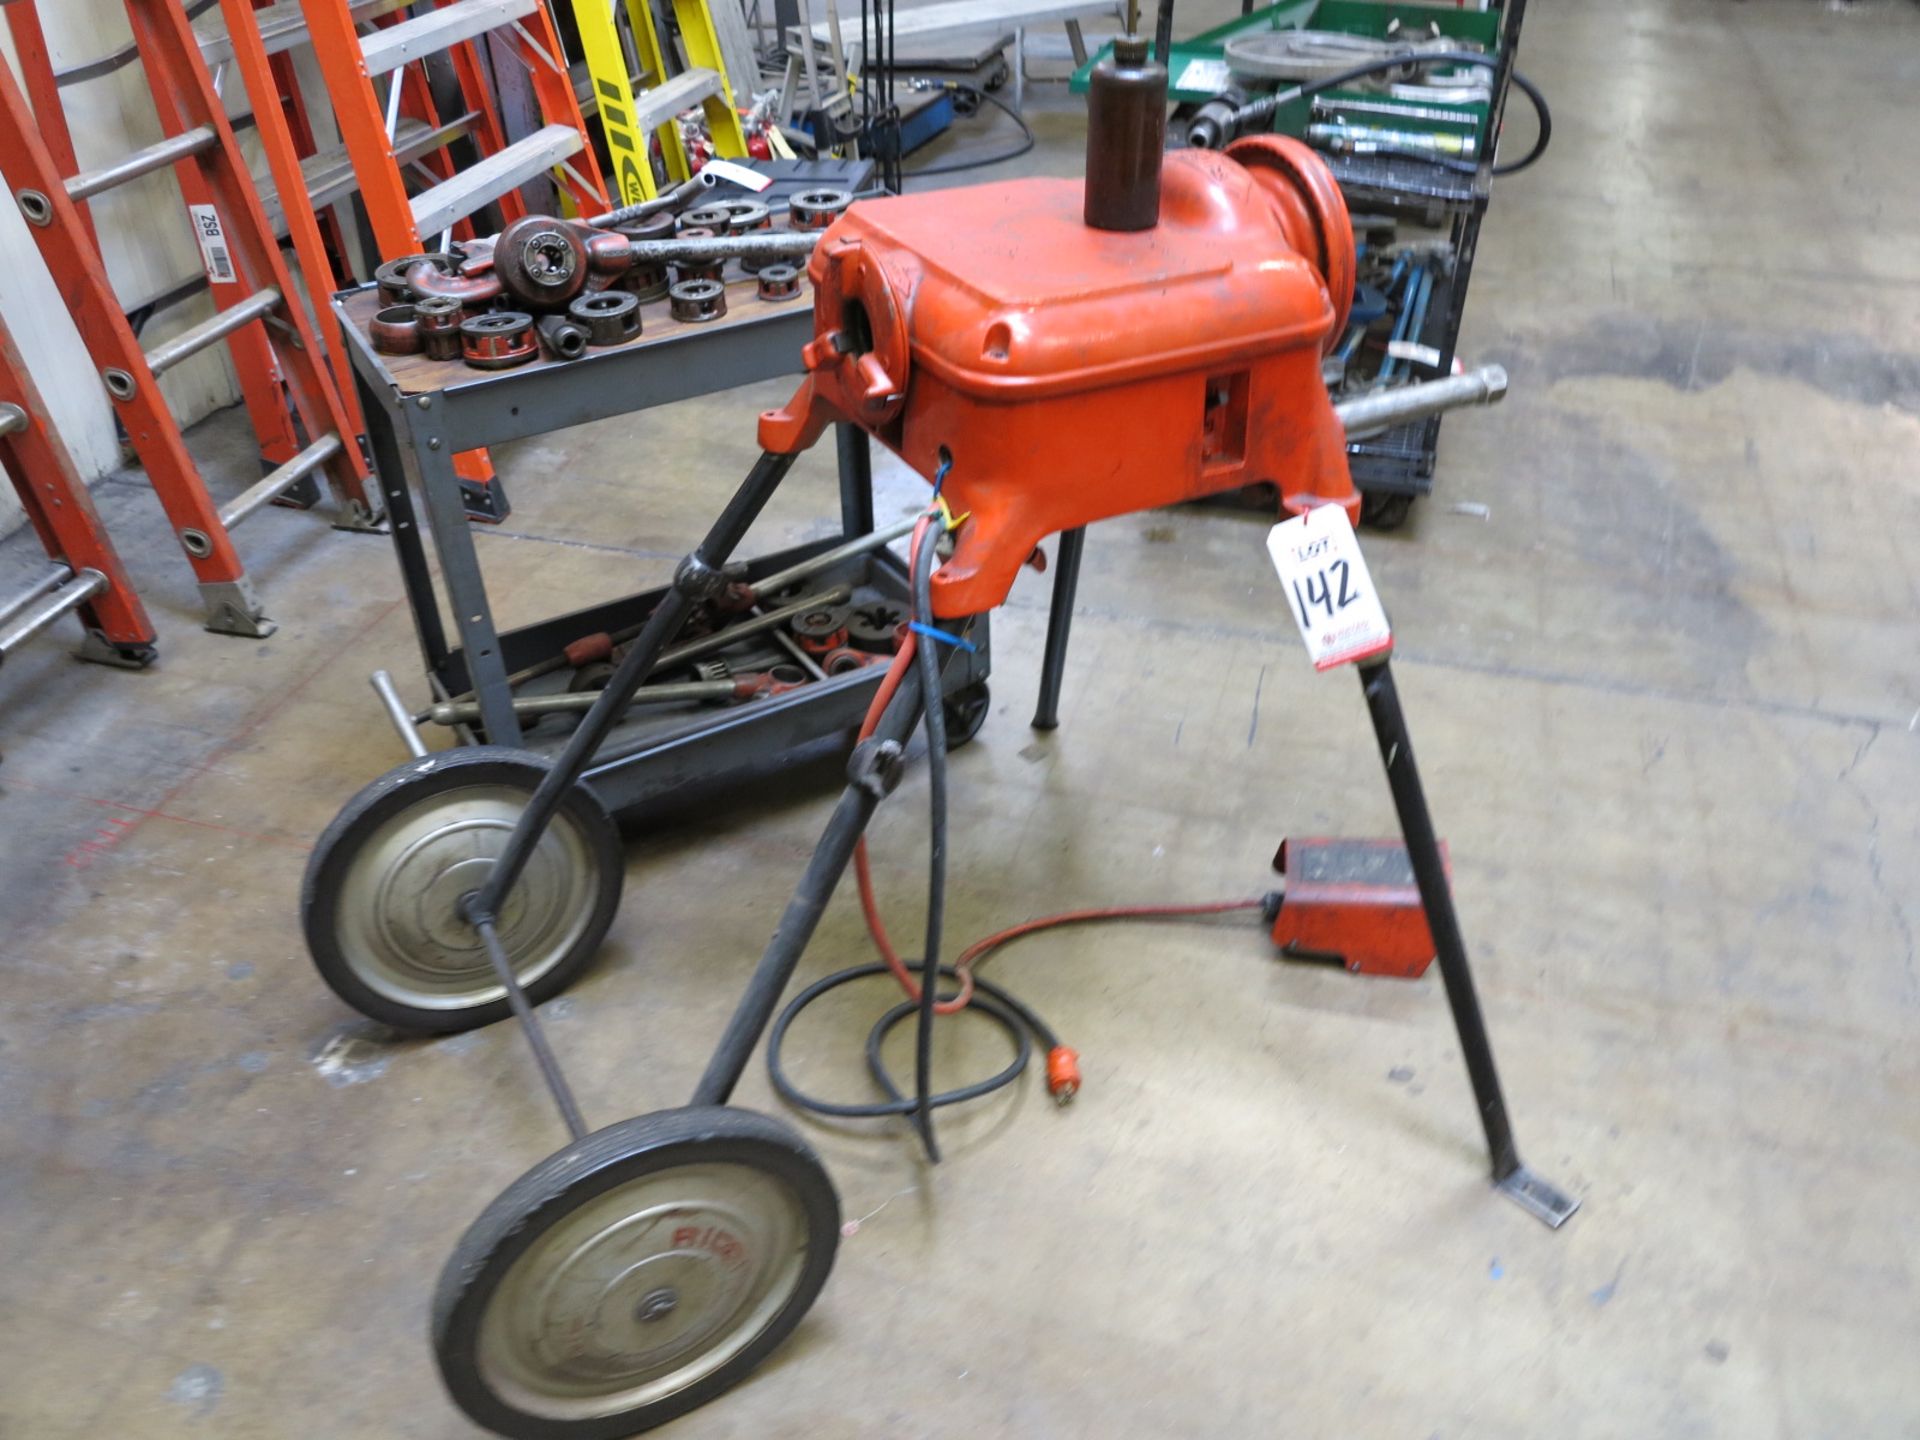 LOT - RIDGID 400A ELECTRIC POWER PIPE THREADER, W/ PEDAL, COMES W/ CART FULL OF DIES, (2) PIPE